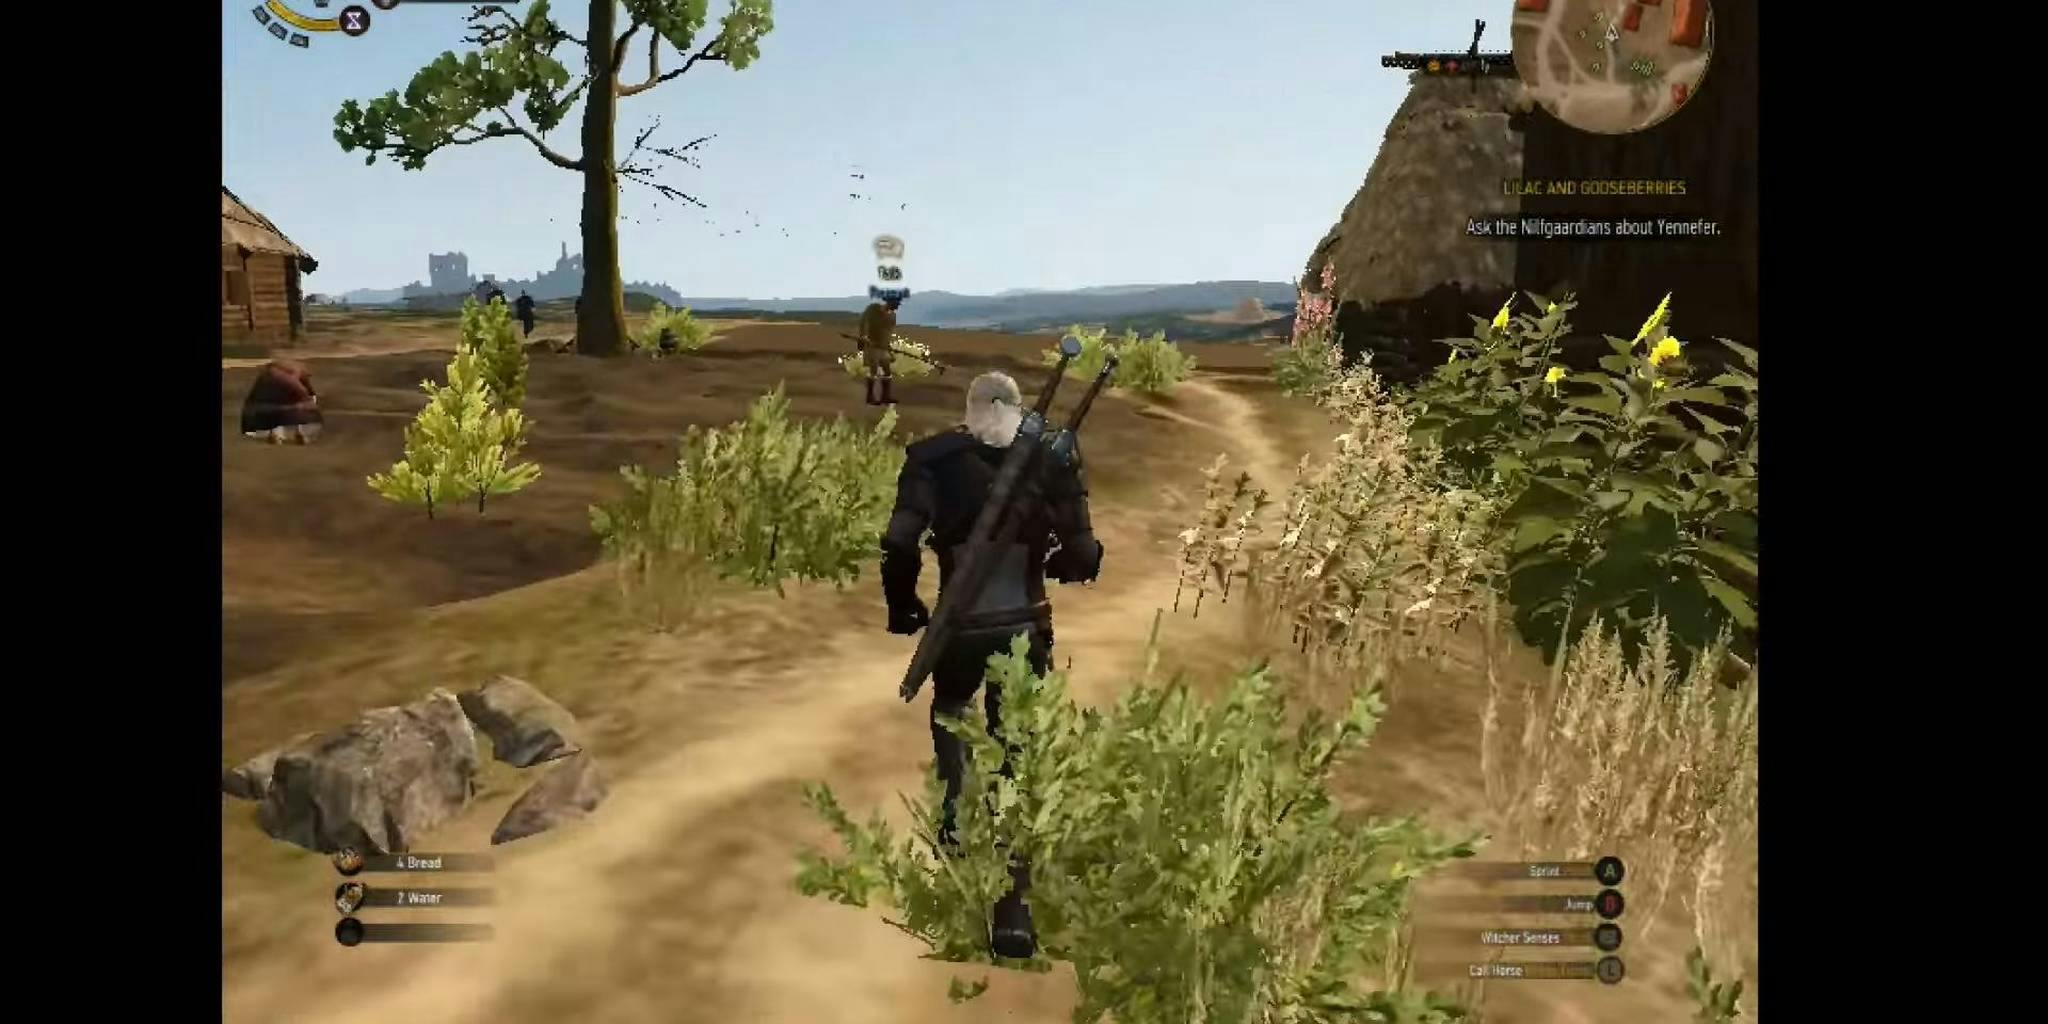 Witcher 3 On Super-Low Specs Looks Like A PS2 Game